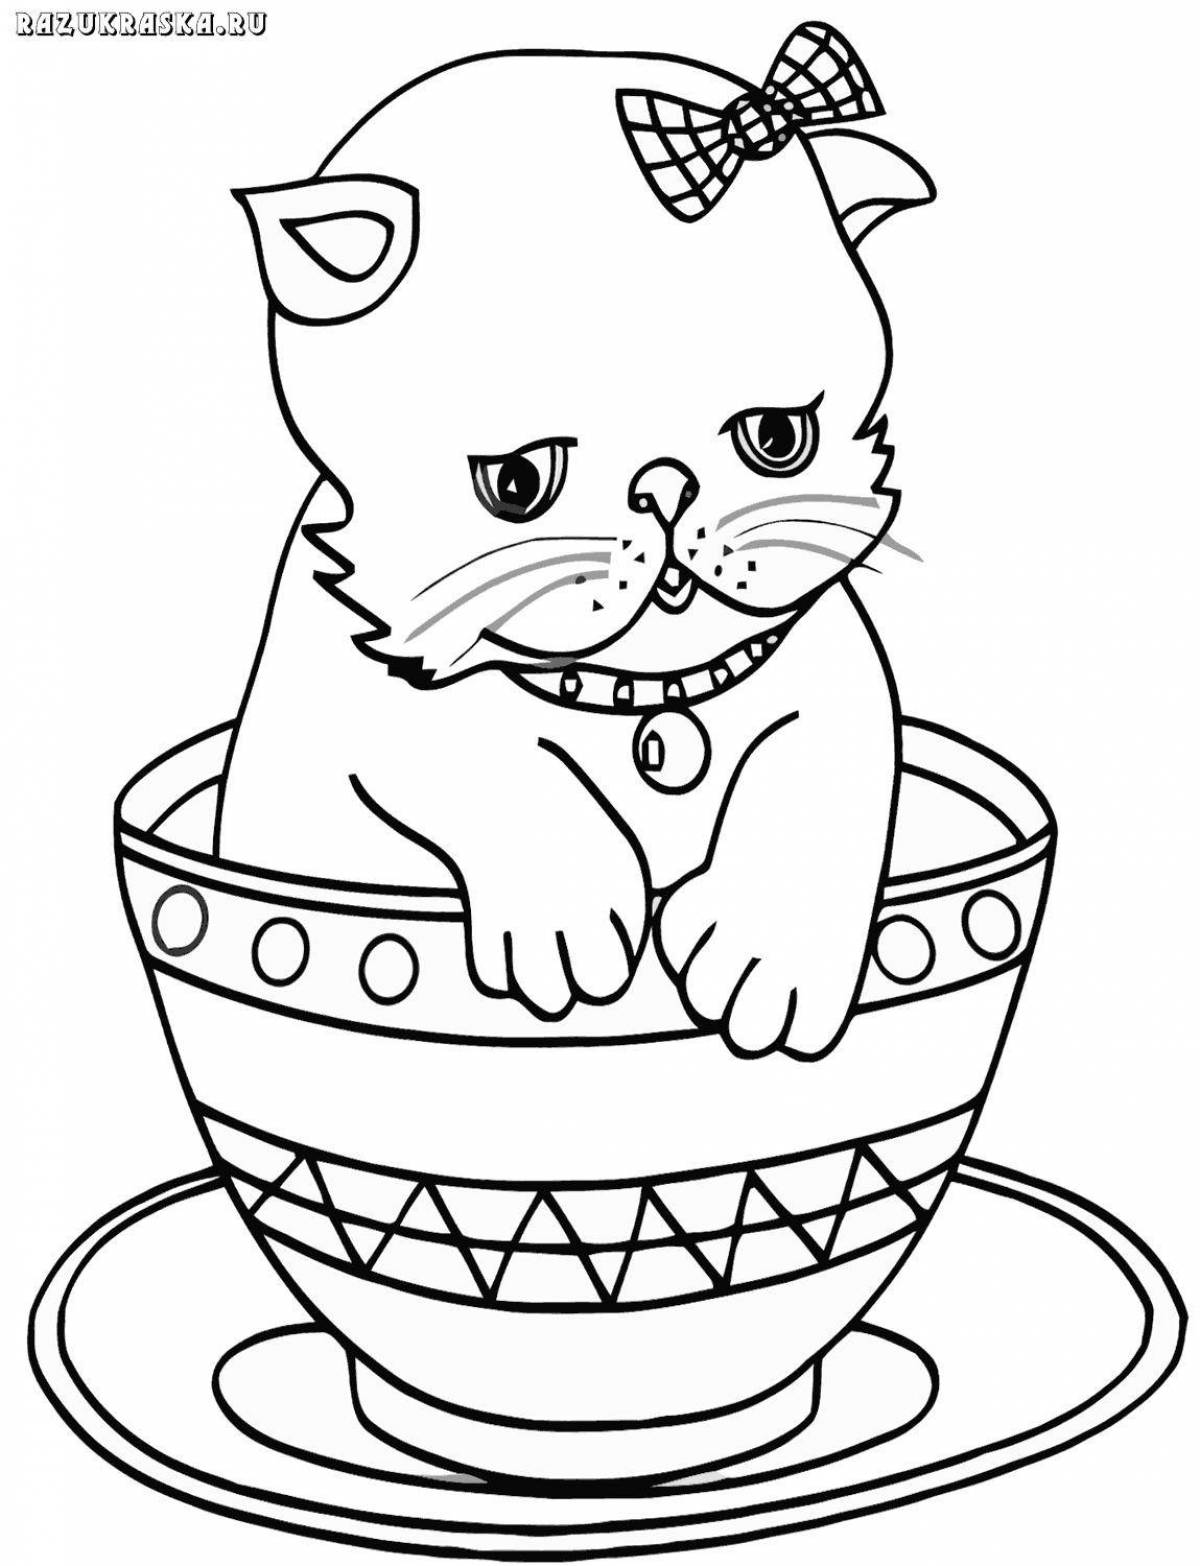 Adorable cat in a cup coloring book